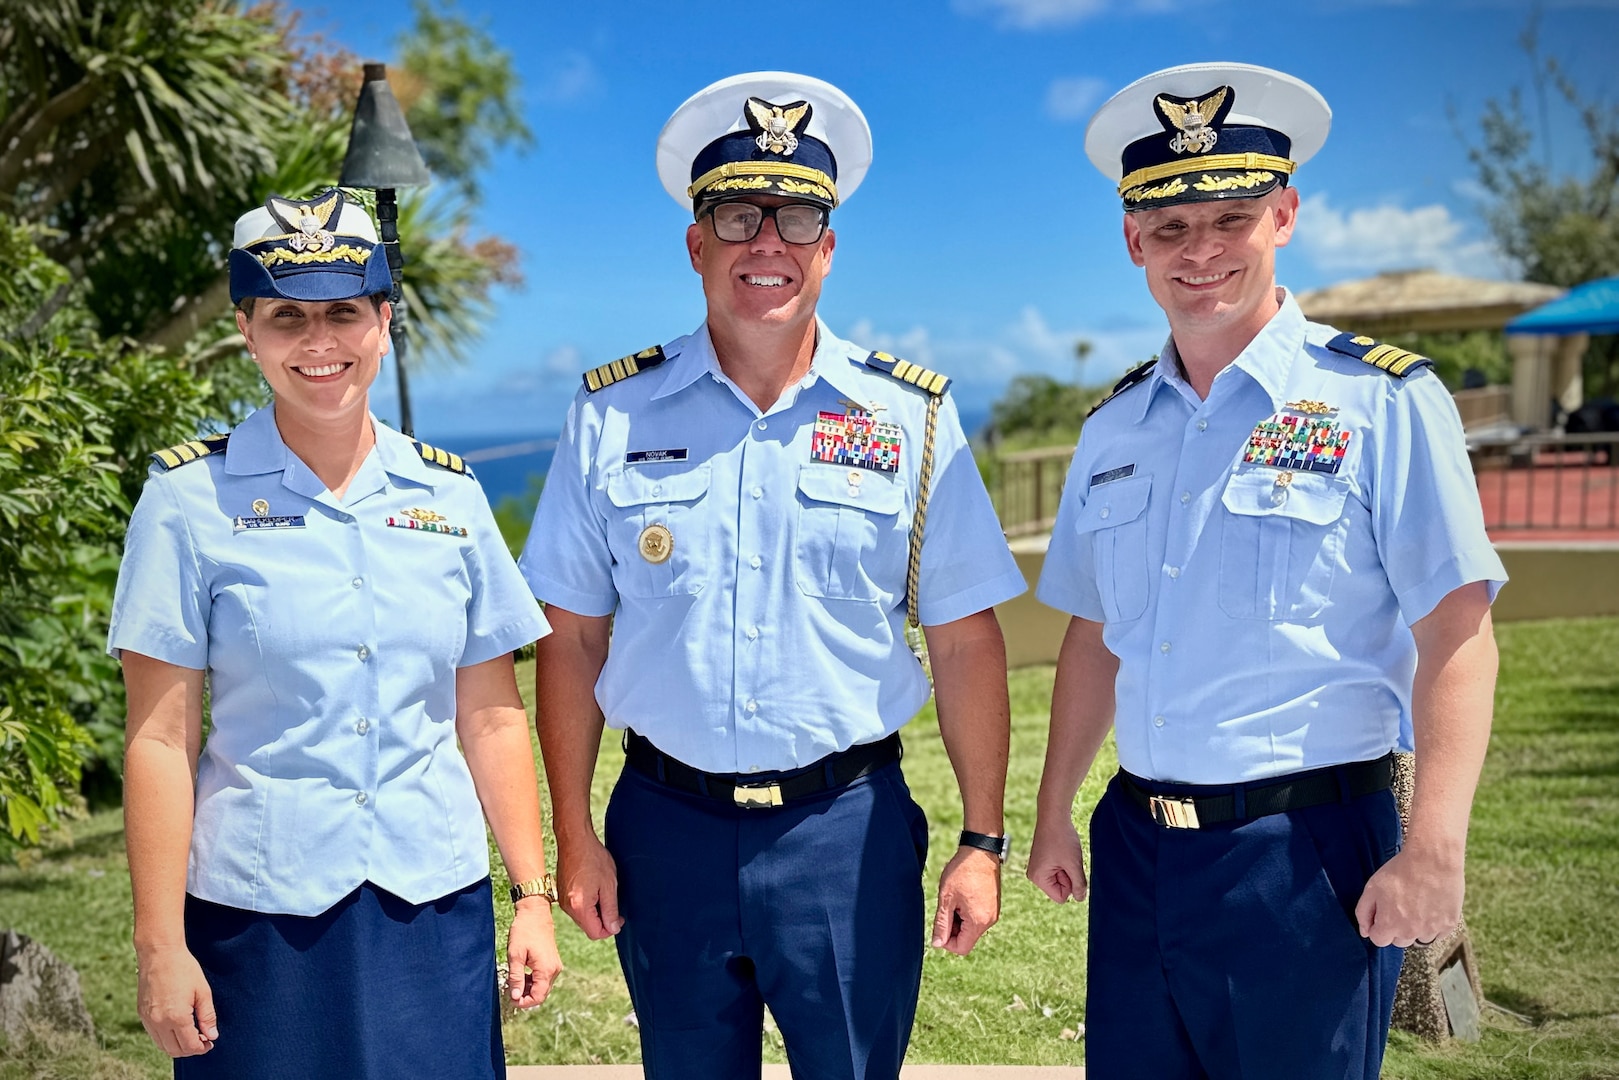 Cmdr. Christopher Jasnoch (left), the new commanding officer of USCGC Hickory (WLB 212), stands for a photo with Cmdr. Linden Dahlkemper (right), the former commanding officer, and Capt. Blake Novak (center), the U.S. Coast Guard 14th District chief of staff, following a change of command ceremony held at the Top o’the Mar in Guam on Wednesday, Sep. 13, 2023. The ceremony also signaled the official shift of the 225-foot seagoing buoy tender in Guam from USCGC Sequoia (WLB 215), currently at its major maintenance availability (MMA) at the U.S. Coast Guard Yard in Baltimore, to USCGC Hickory, which is just completing MMA and will now serve the Western Pacific. (U.S. Coast Guard photo by Chief Warrant Officer Sara Muir)